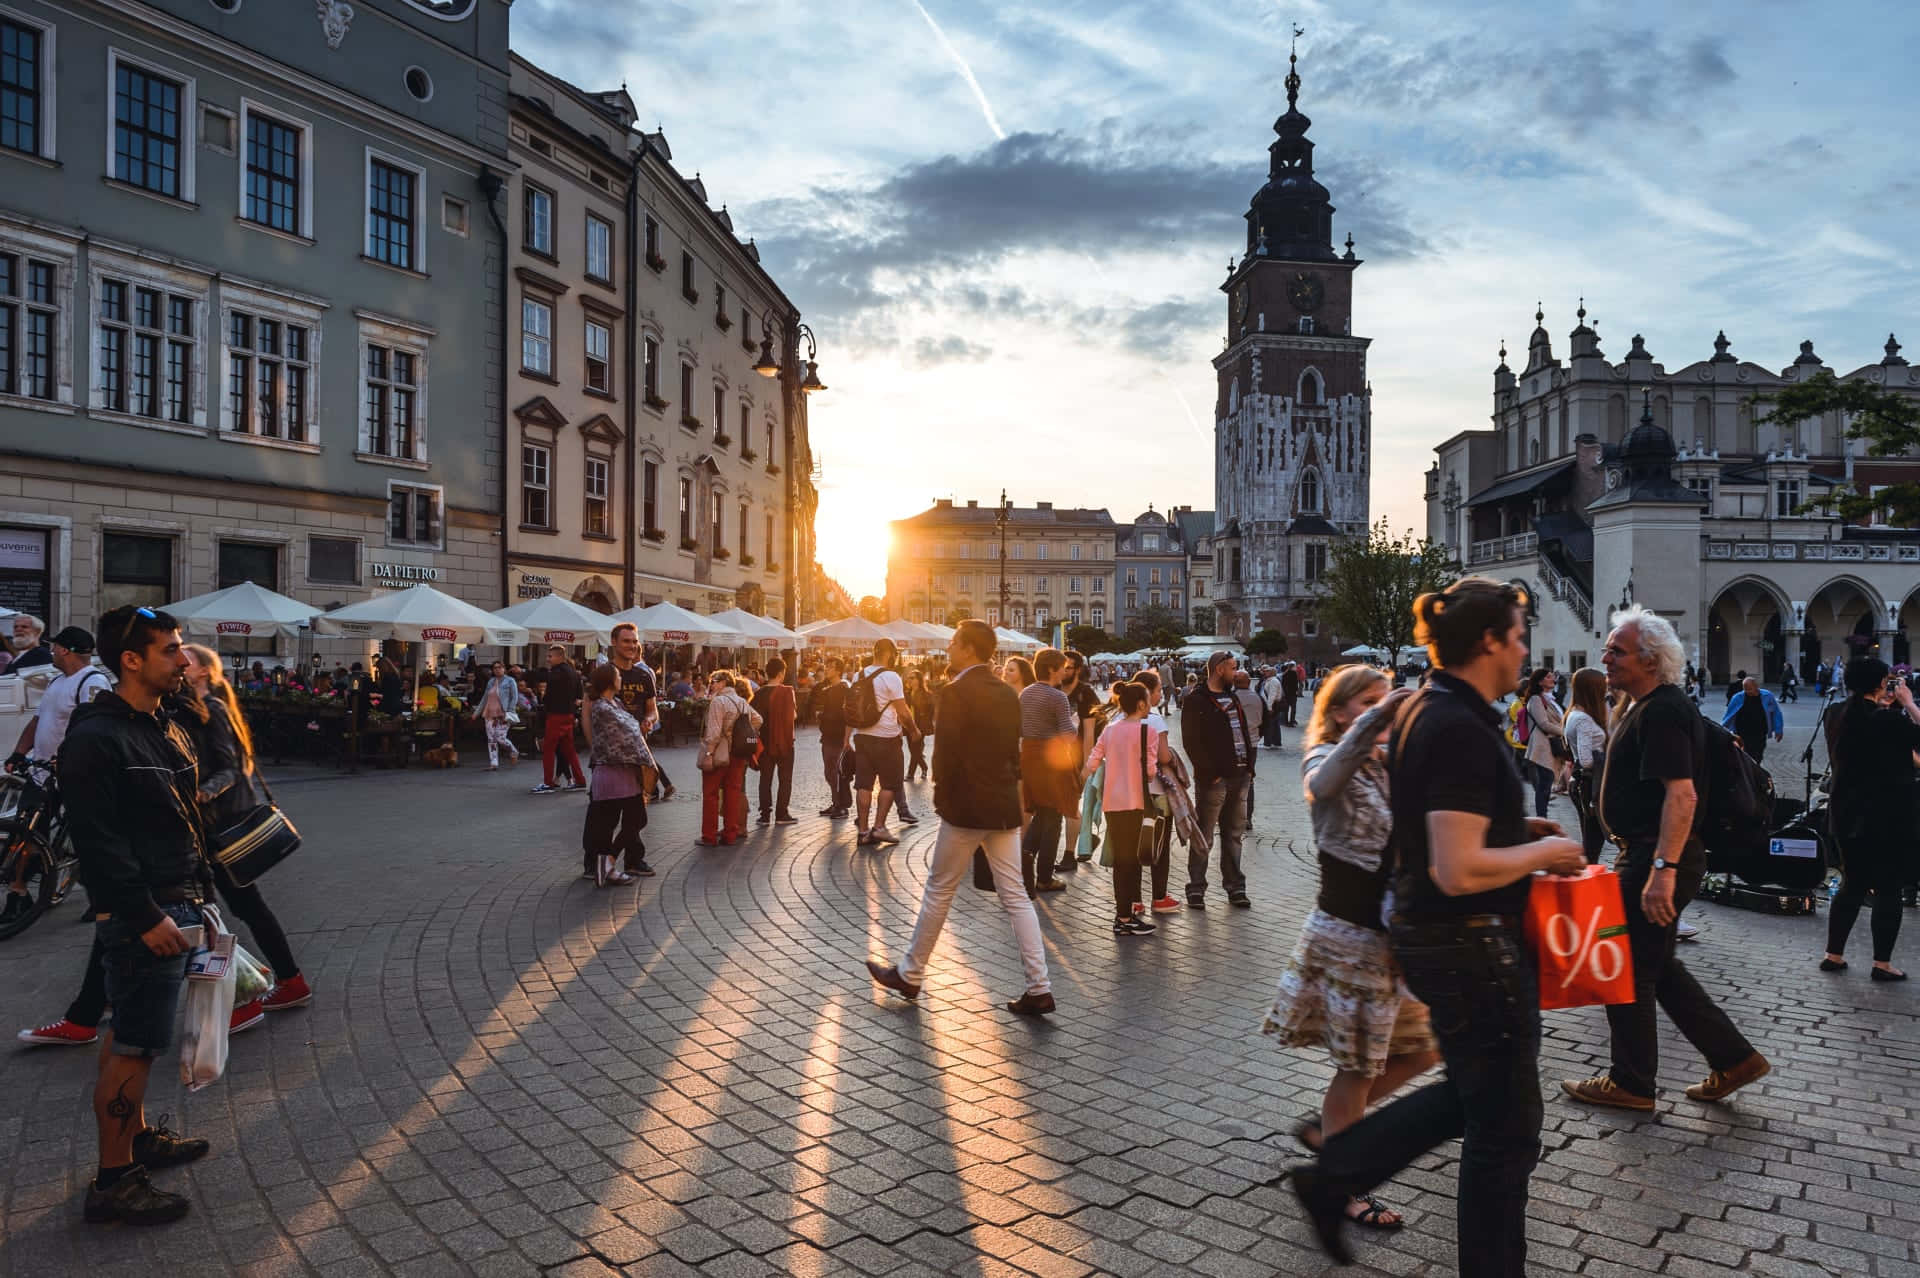 A City Square With People Walking Around At Sunset Wallpaper